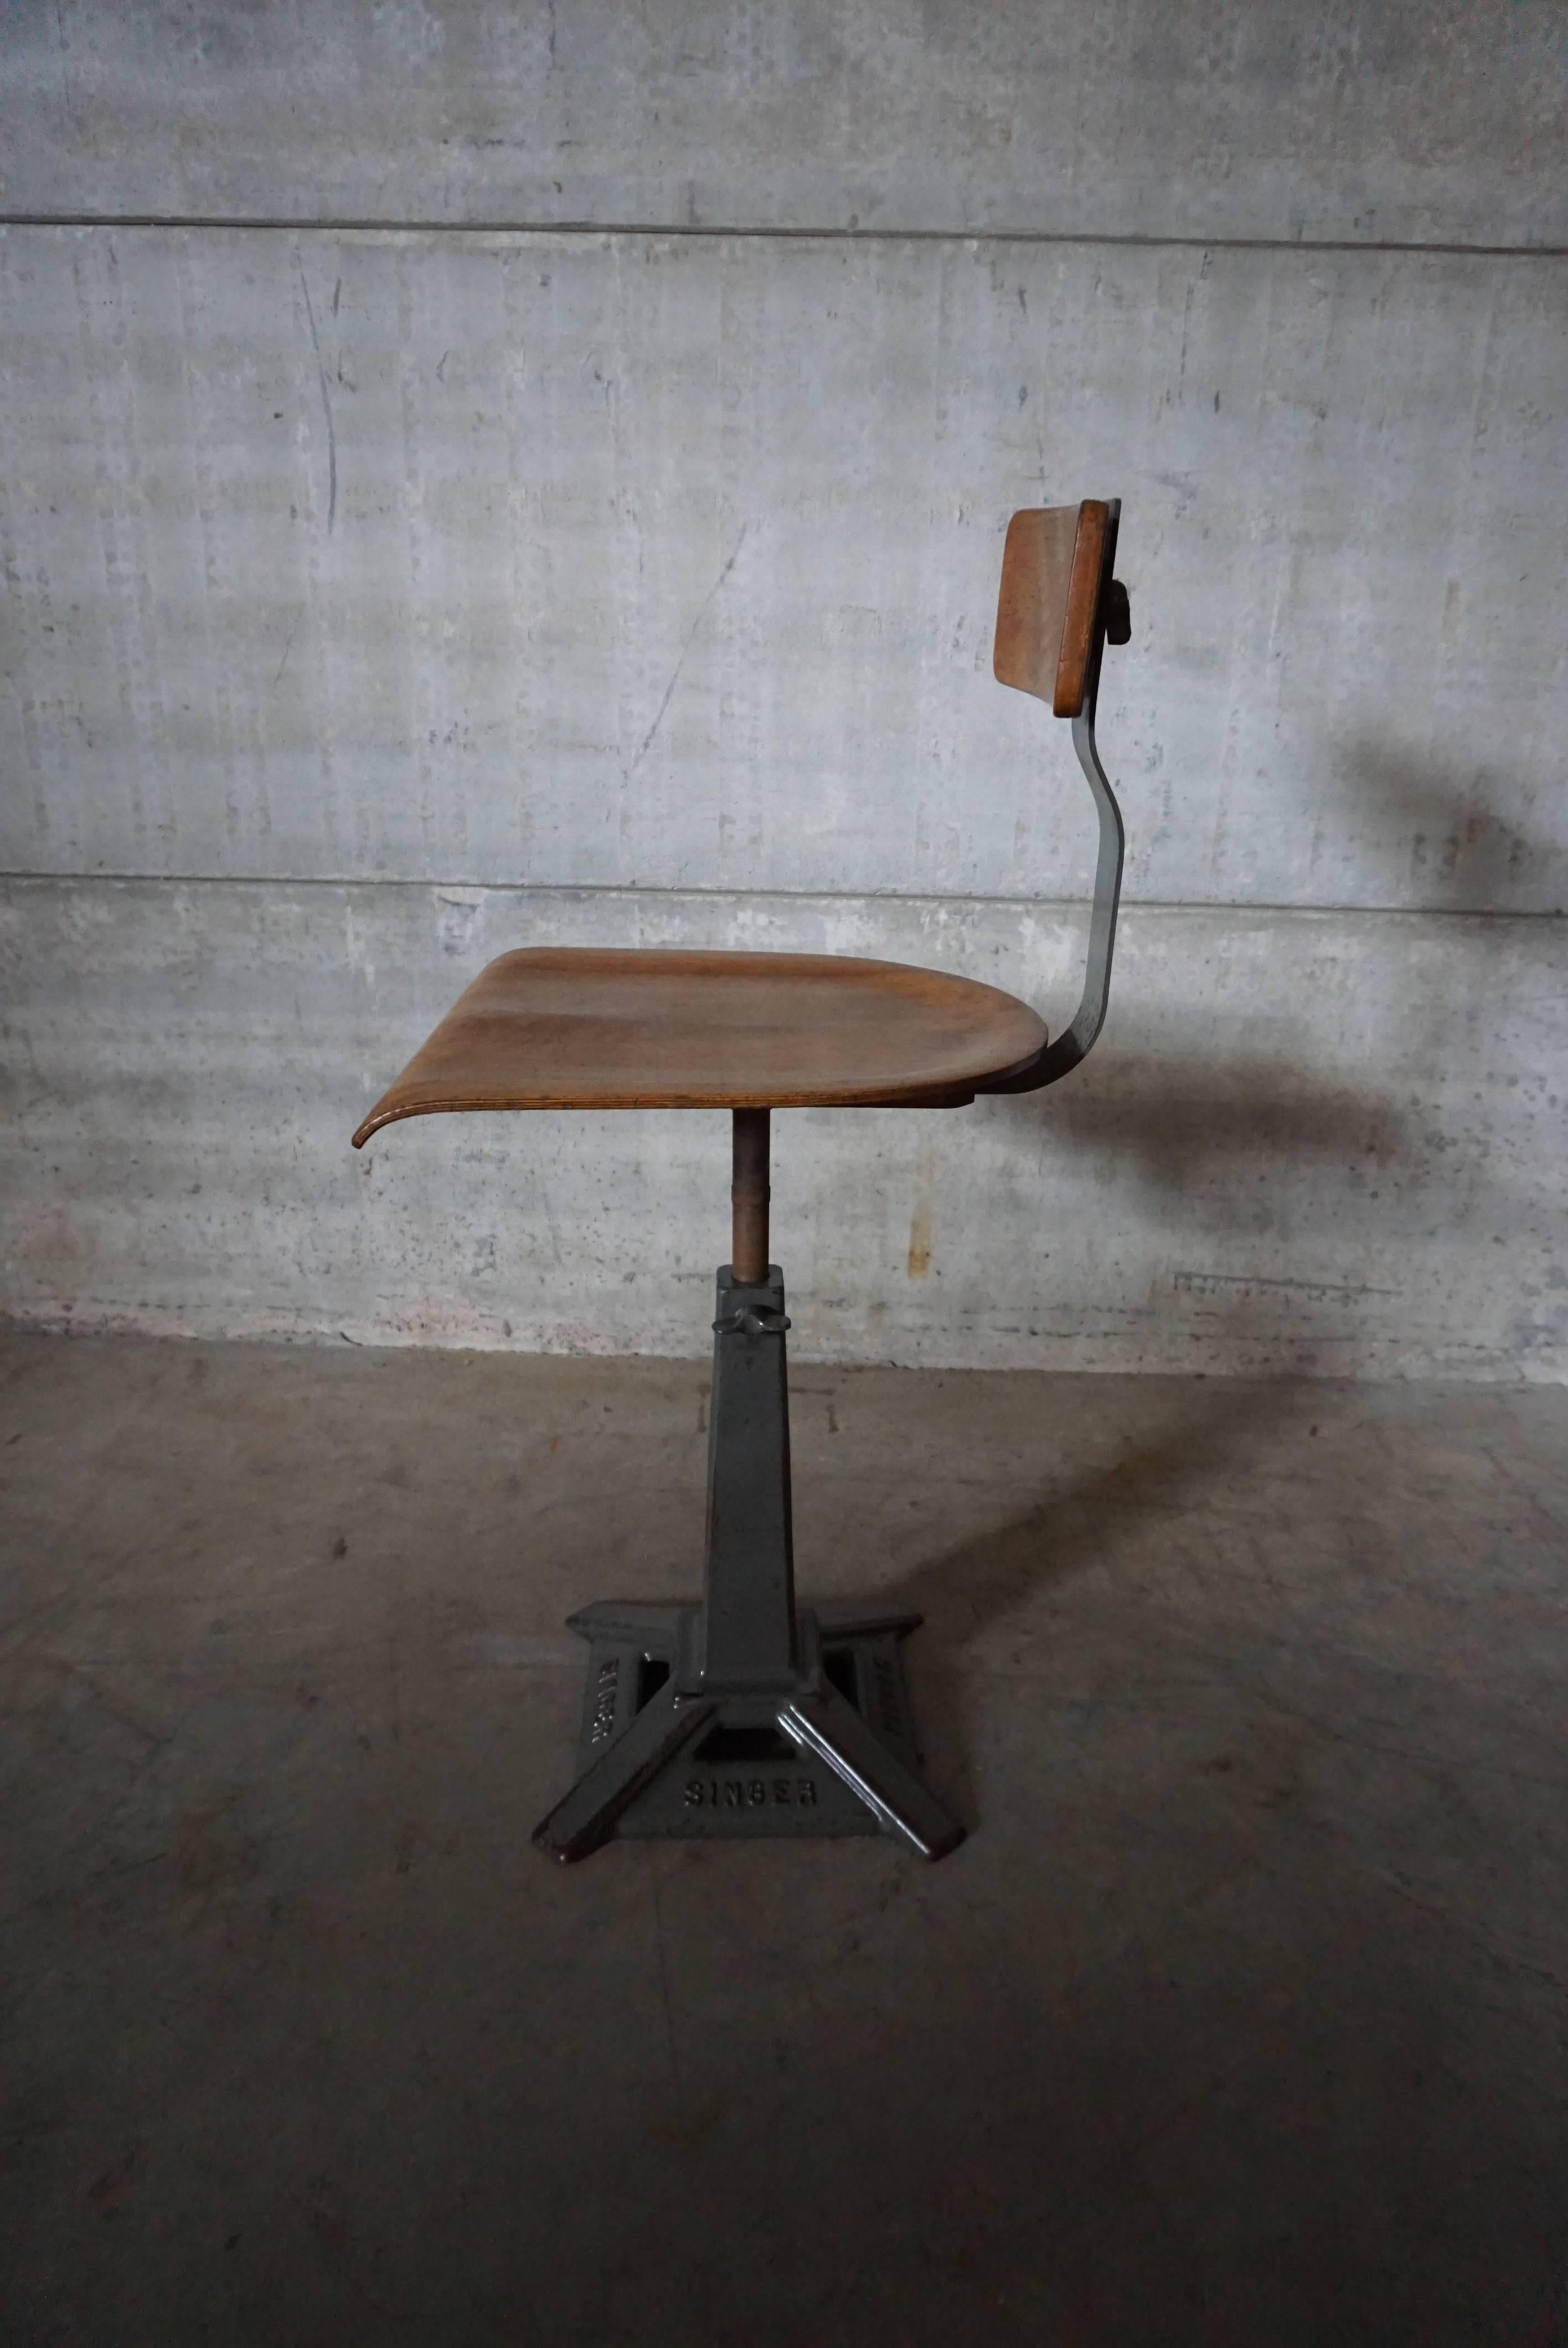 Singer machinist or work chairs. Branded cast iron base with factory painted finish, steam bent ply seat and backrest. Manufactured by “Simanco” the Singer manufacturing company England, 1930s.